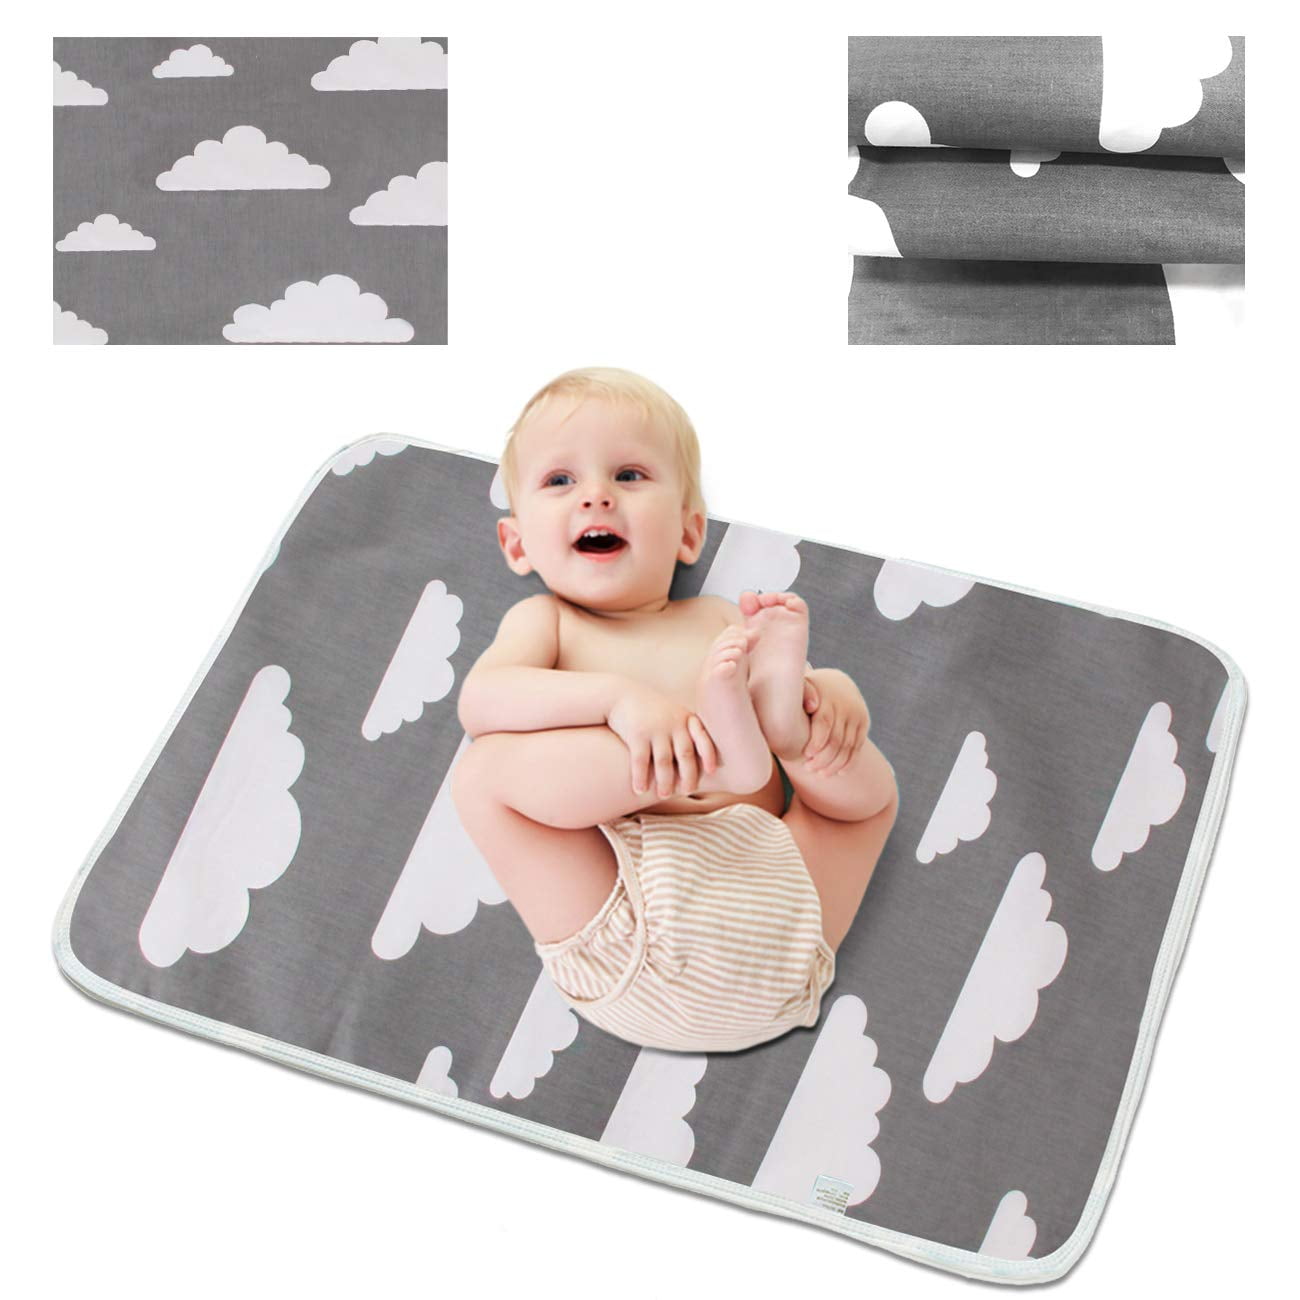 Baby Bath Changing Mat Infant Boy Girl Toddler Padded Reusable Waterproof Soft 